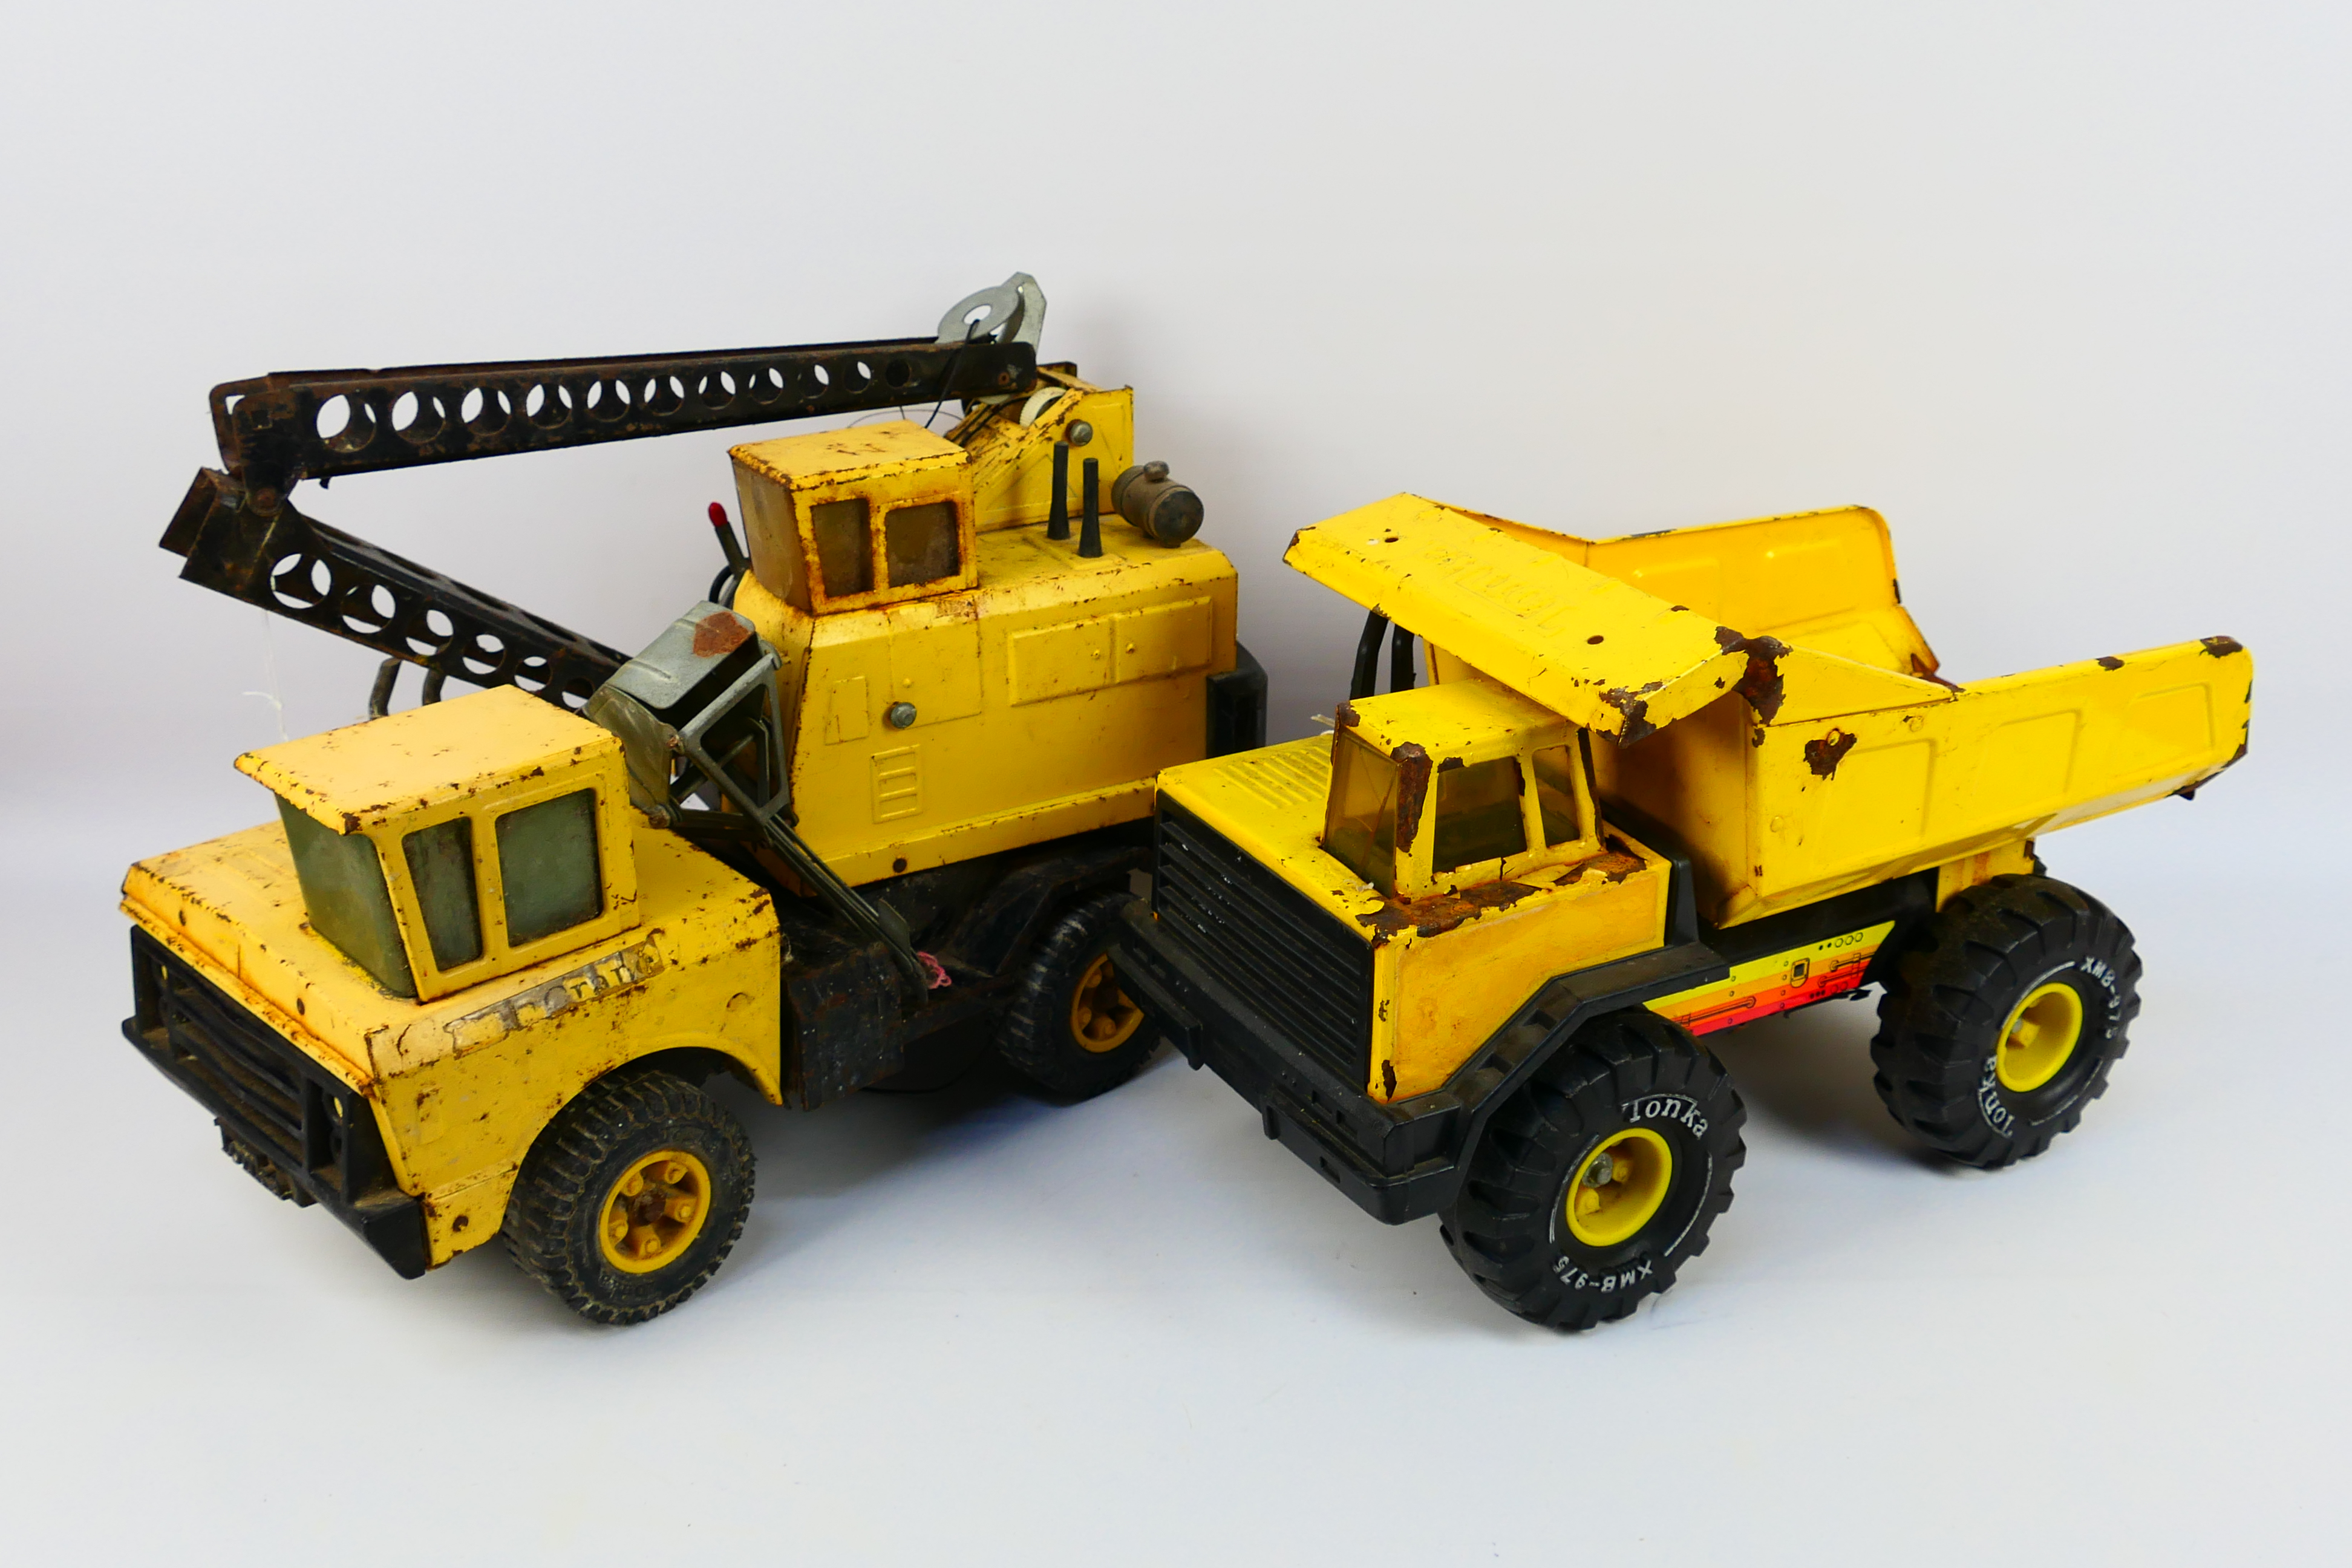 Tonka - 2 x large Tonka construction vehicles - Lot includes a Turbo Diesel dump truck and a crane.